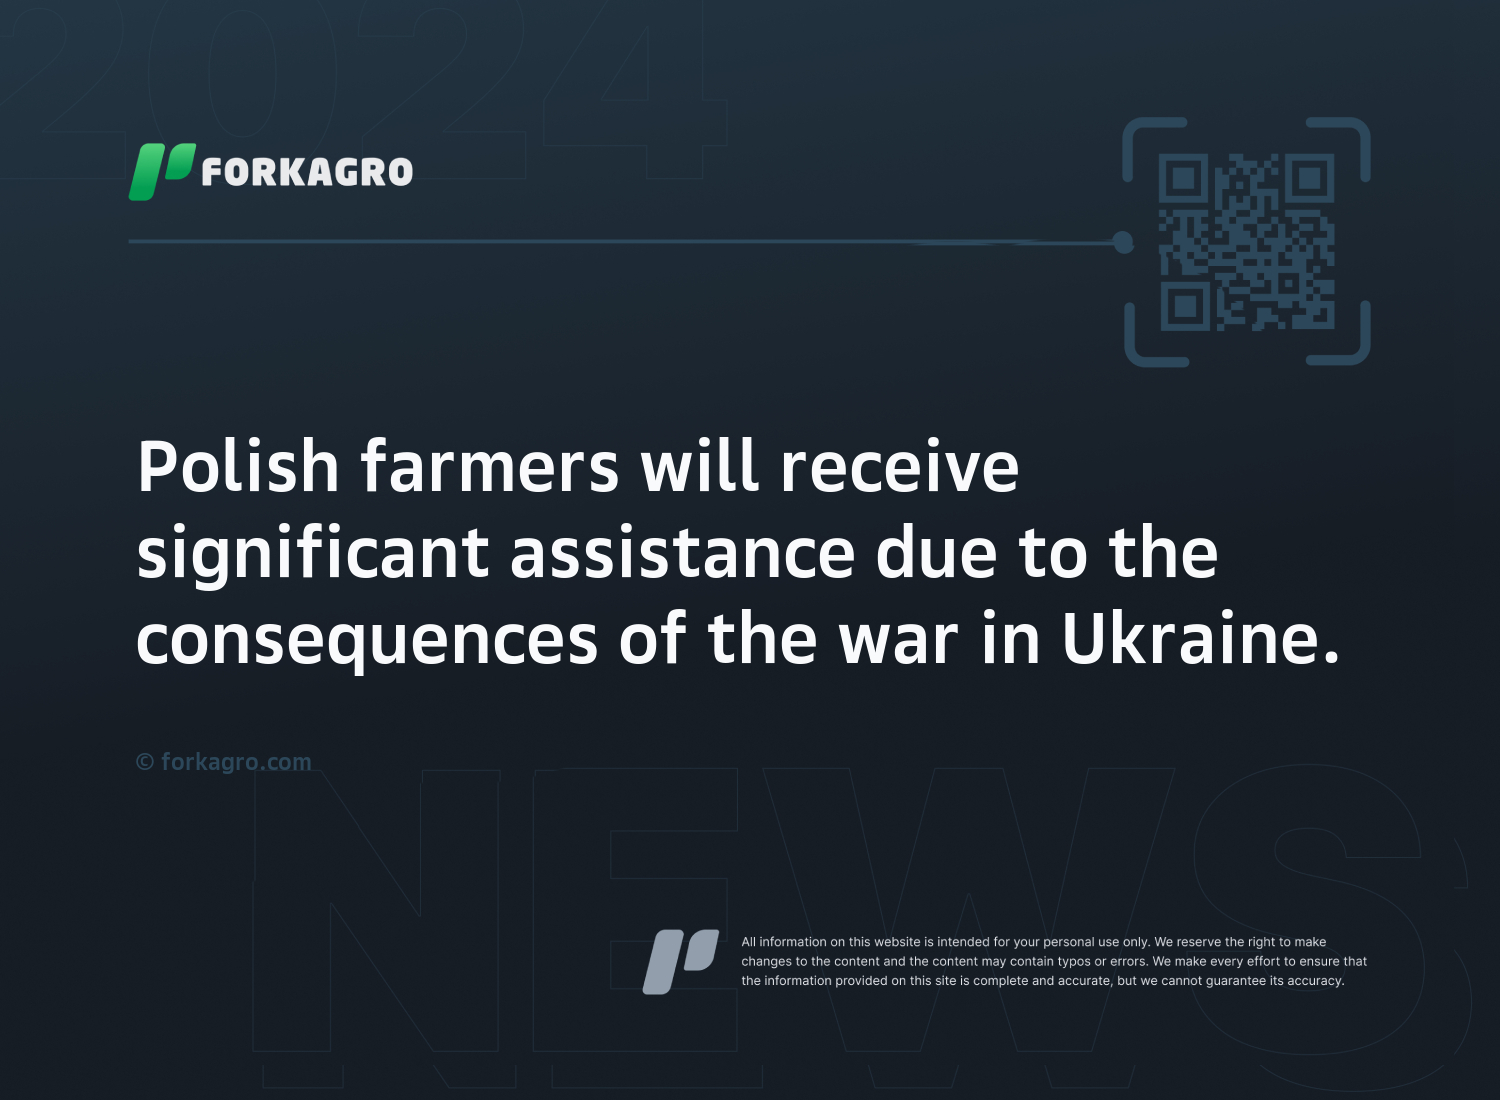 Polish farmers will receive significant assistance due to the consequences of the war in Ukraine.